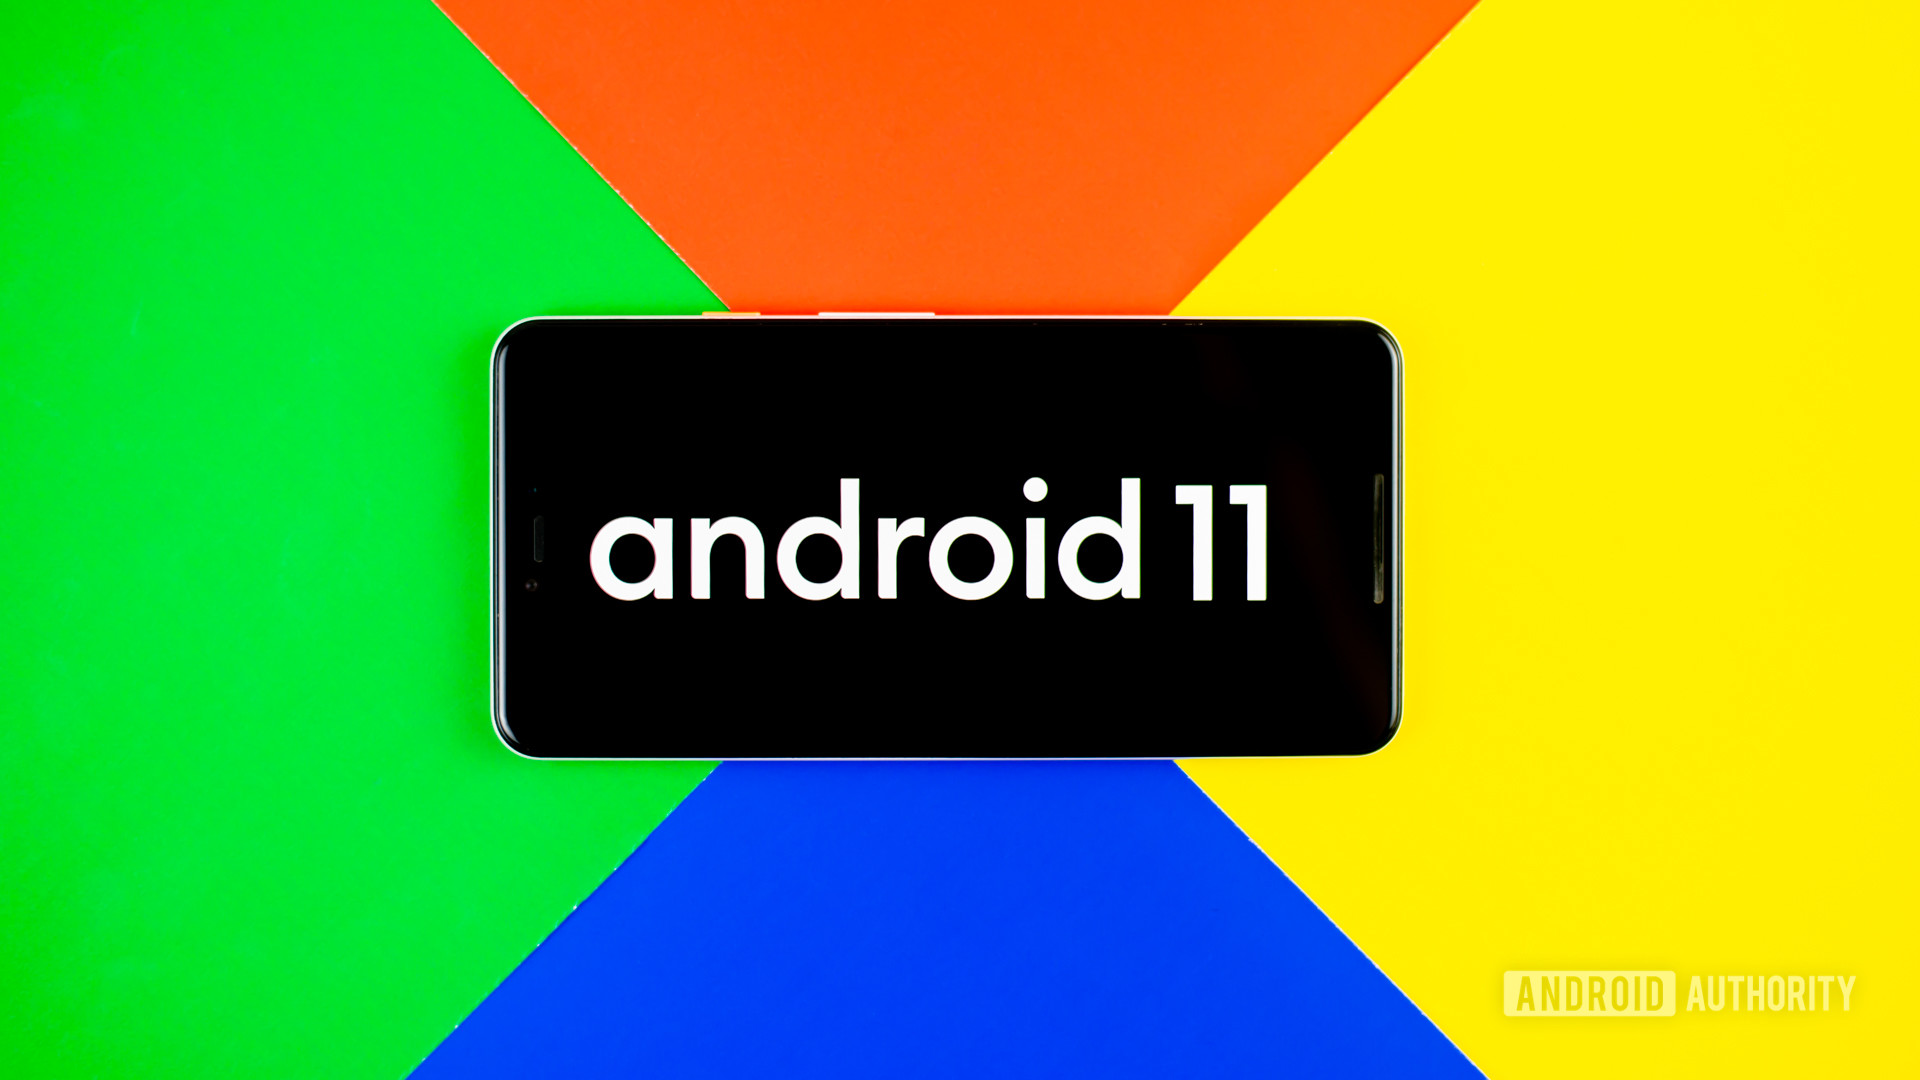 Android 11 stock photo with Google colors 2